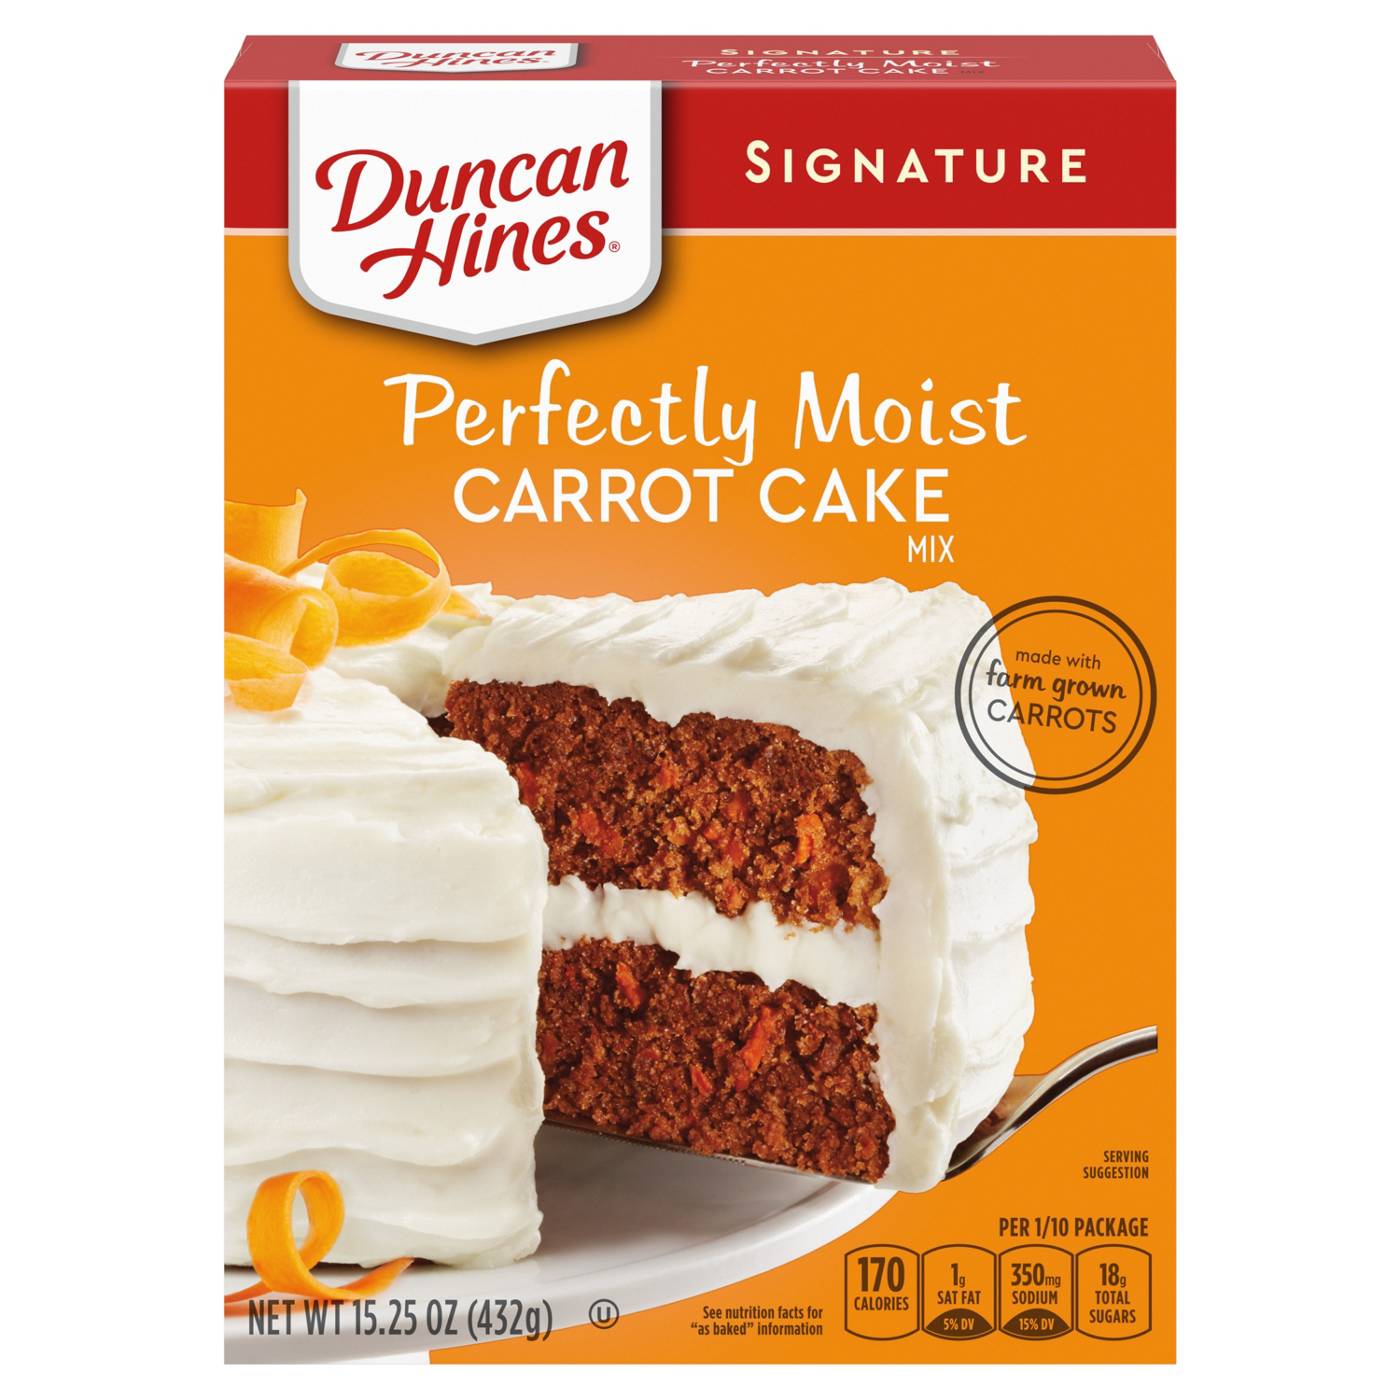 Duncan Hines Signature Perfectly Moist Carrot Cake Mix; image 1 of 4